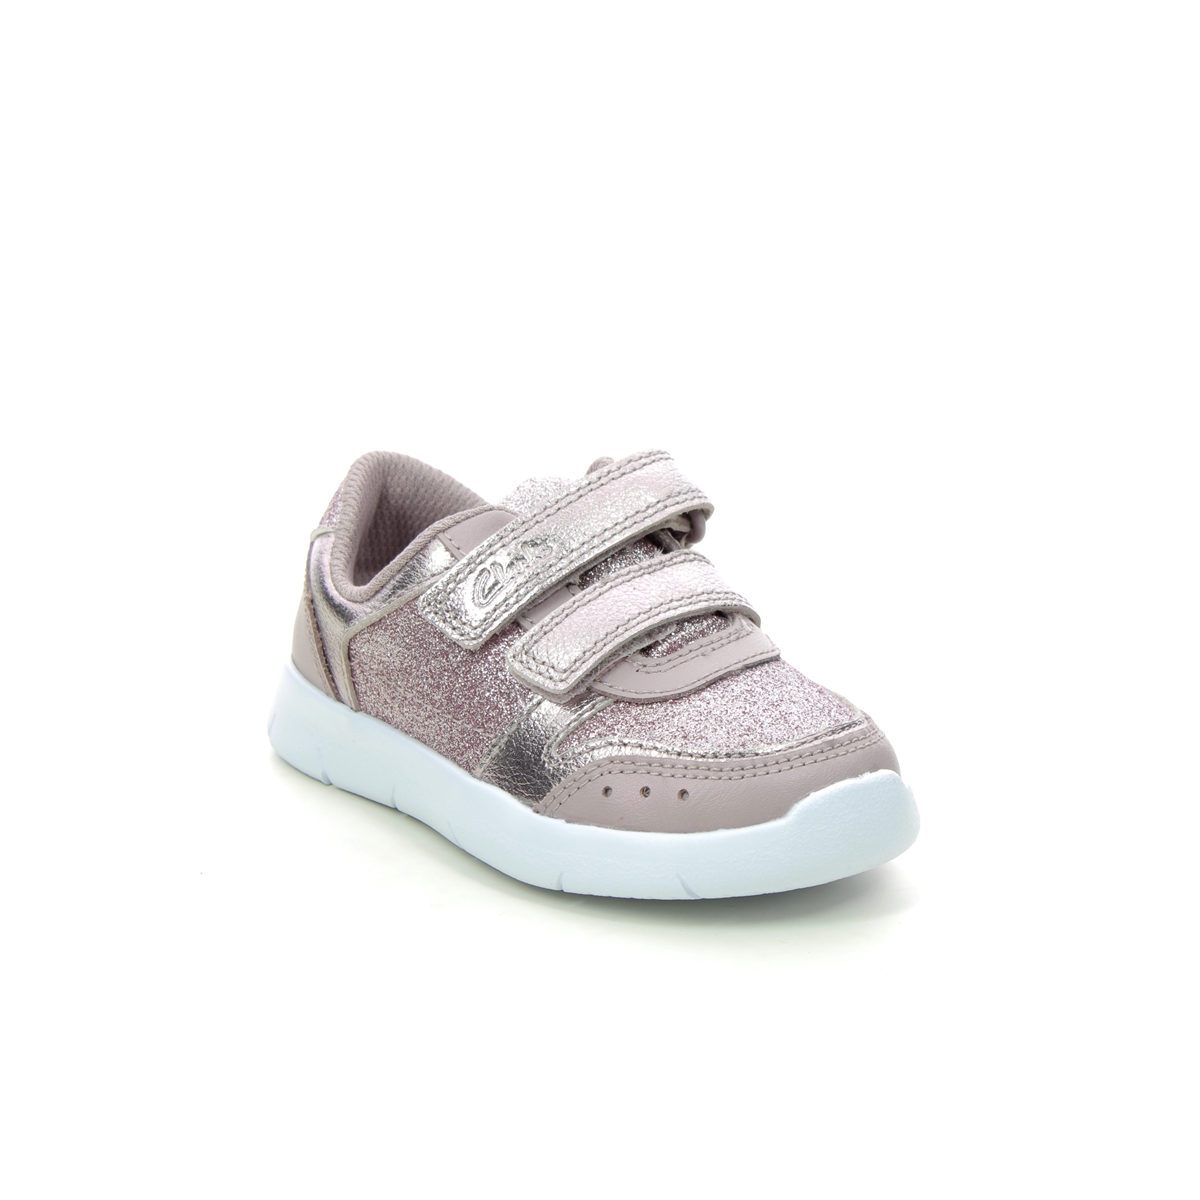 Clarks Ath Sonar T Pink Kids toddler girls trainers 6837-27G in a Plain Leather and Man-made in Size 6.5